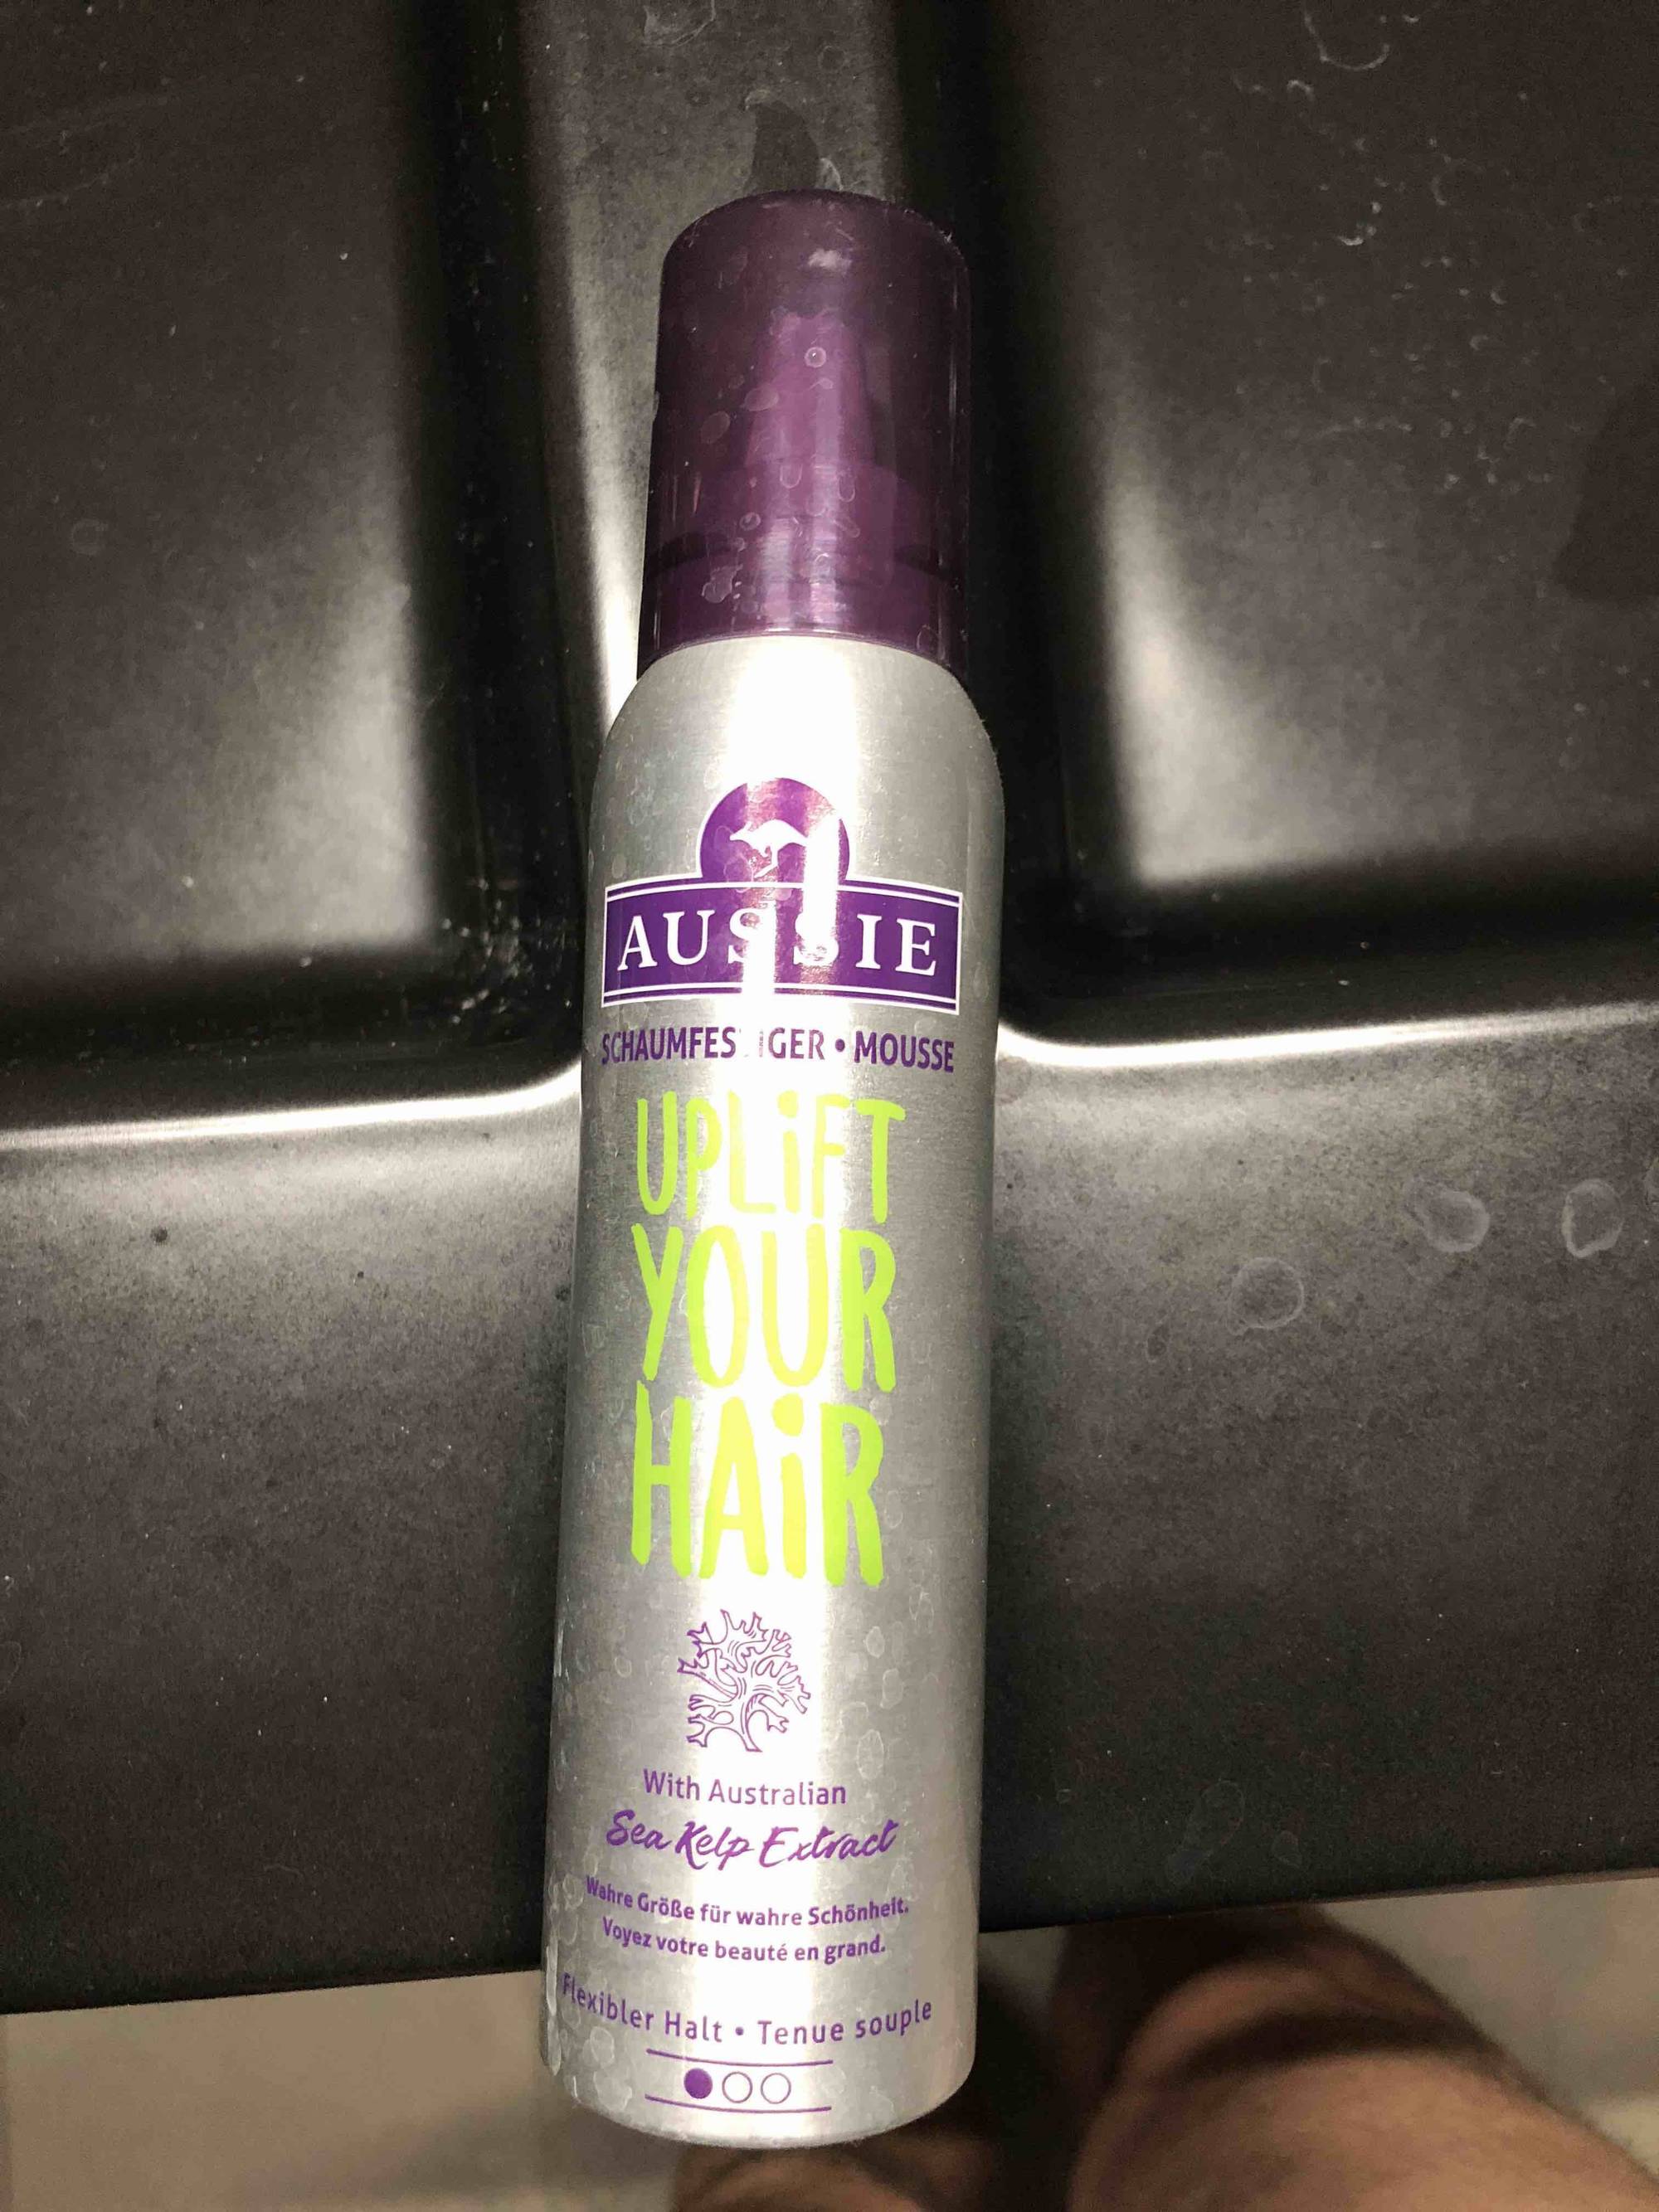 AUSSIE - Uplift your hair - Mousse 